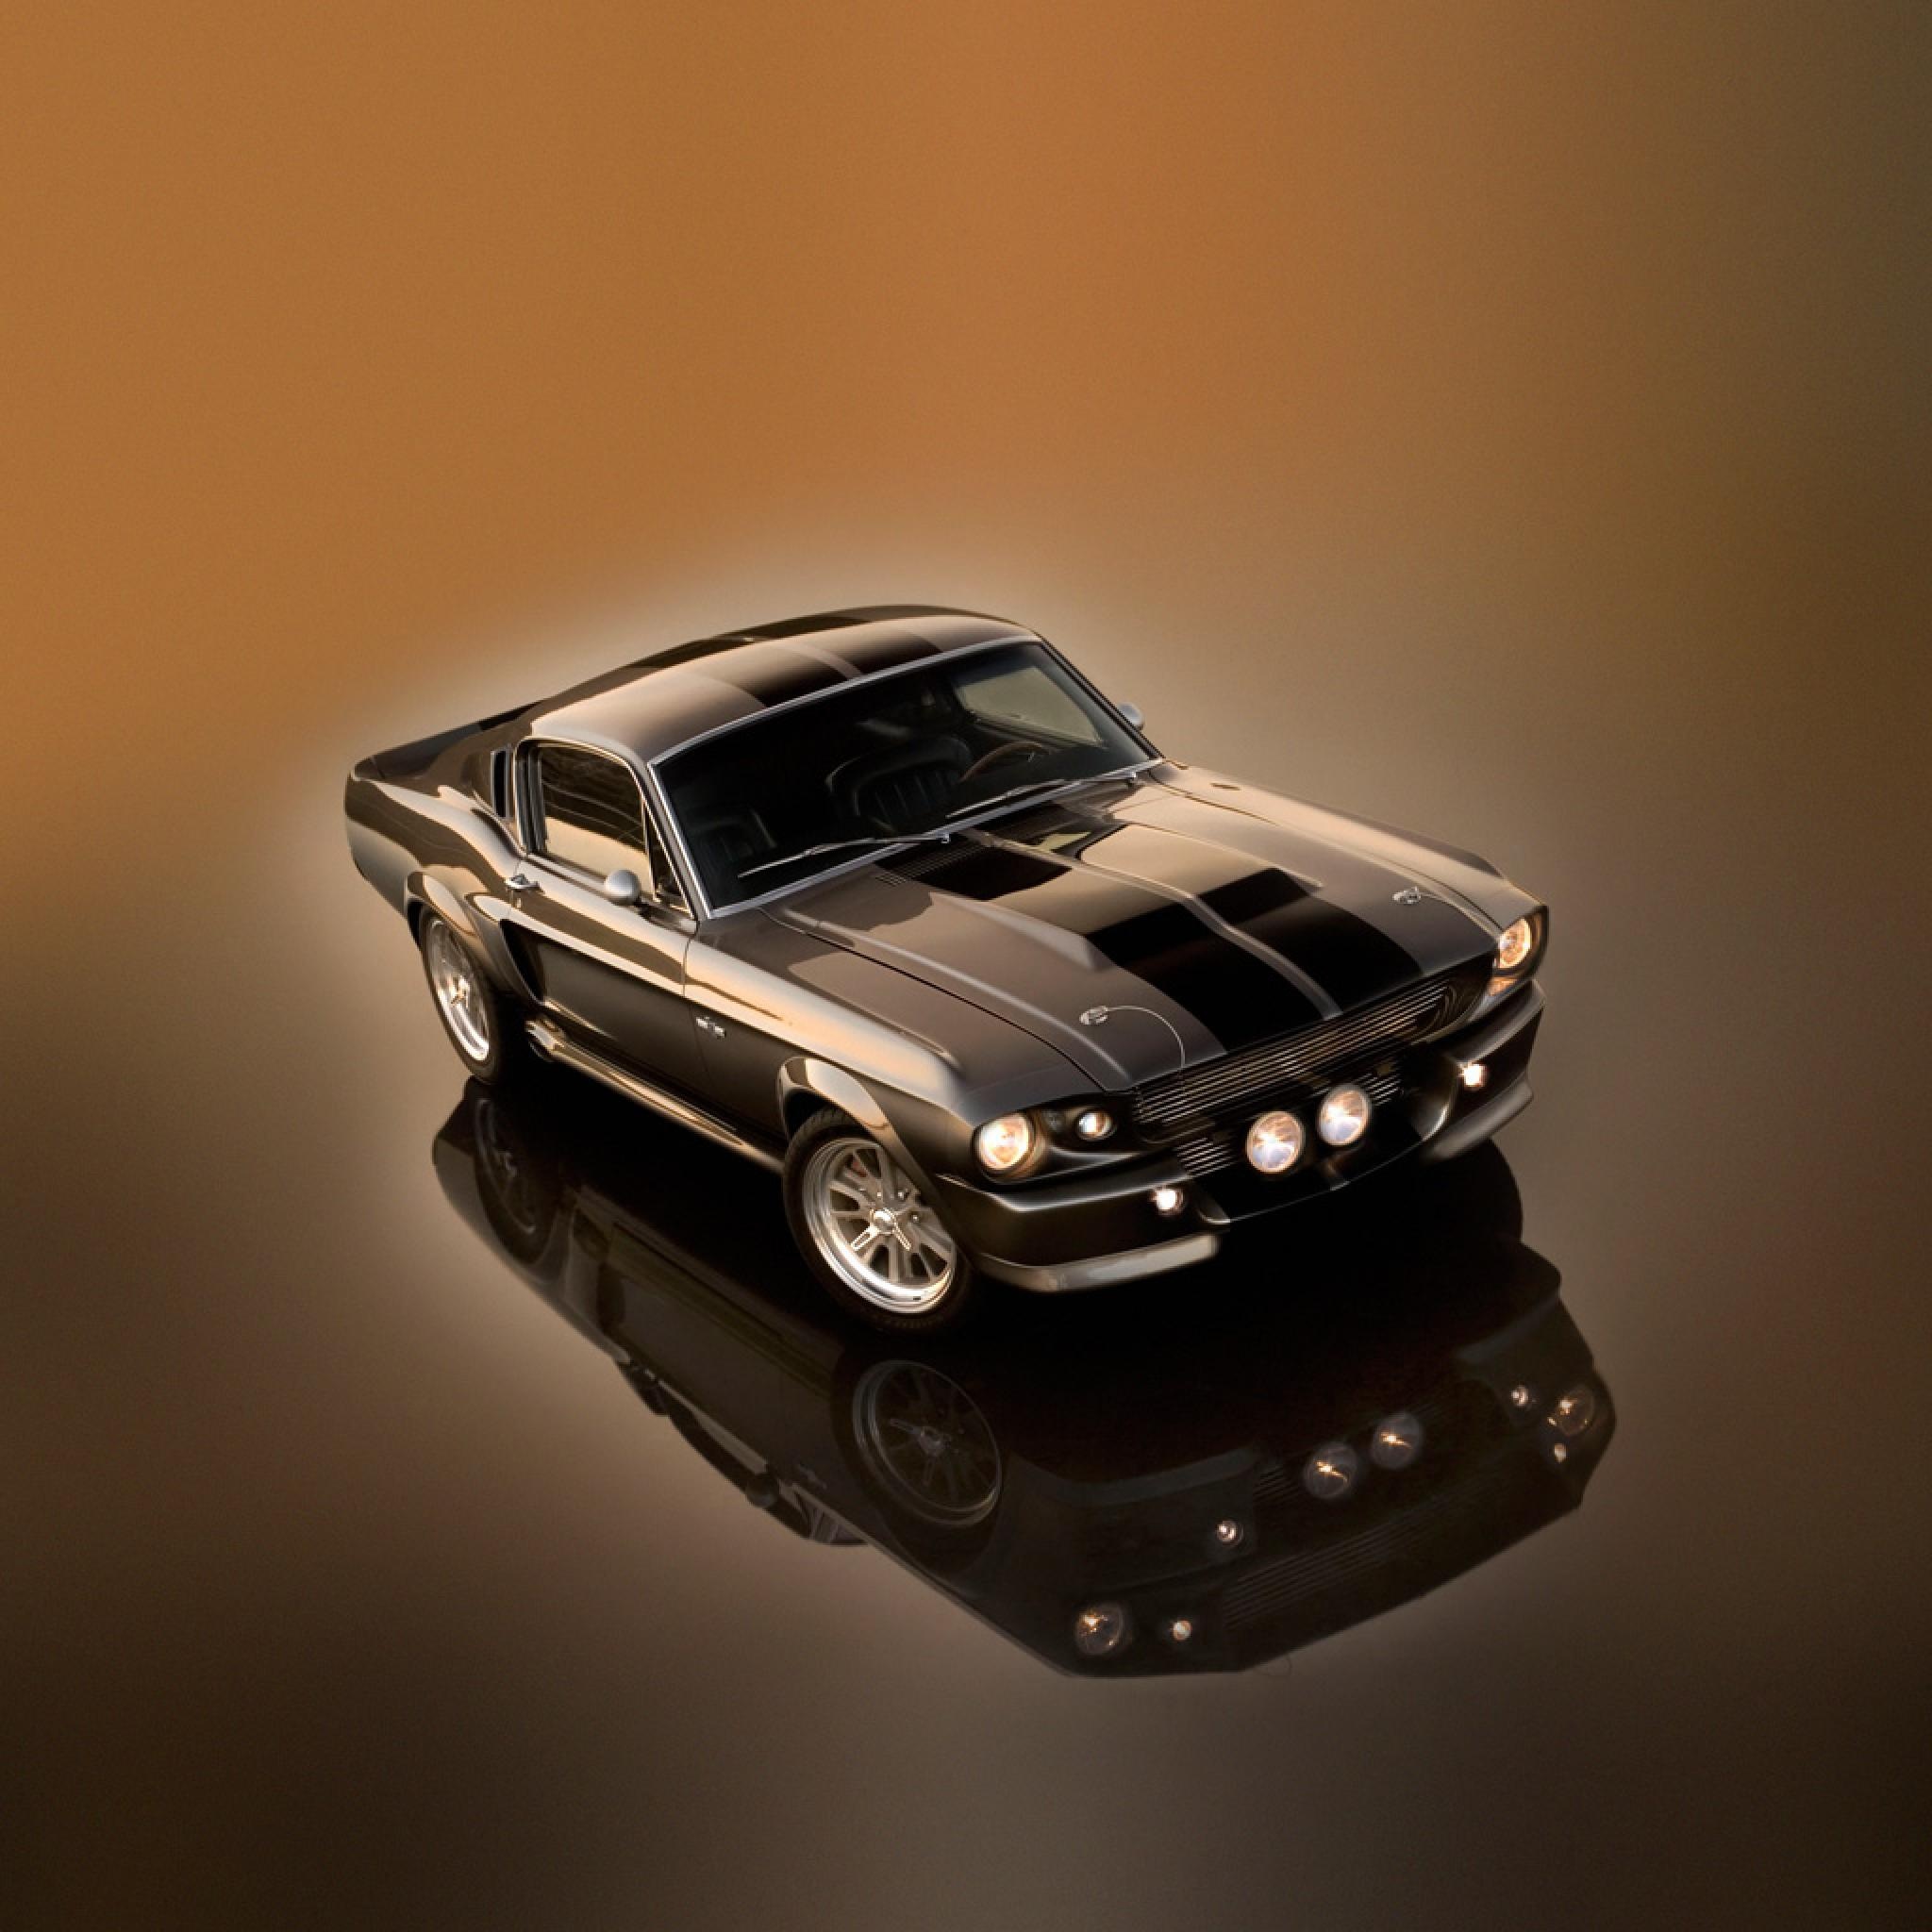 1967 Mustang Eleanor, Vintage muscle aesthetic, Iconic design, Automotive history, Powerful stance, 2050x2050 HD Handy